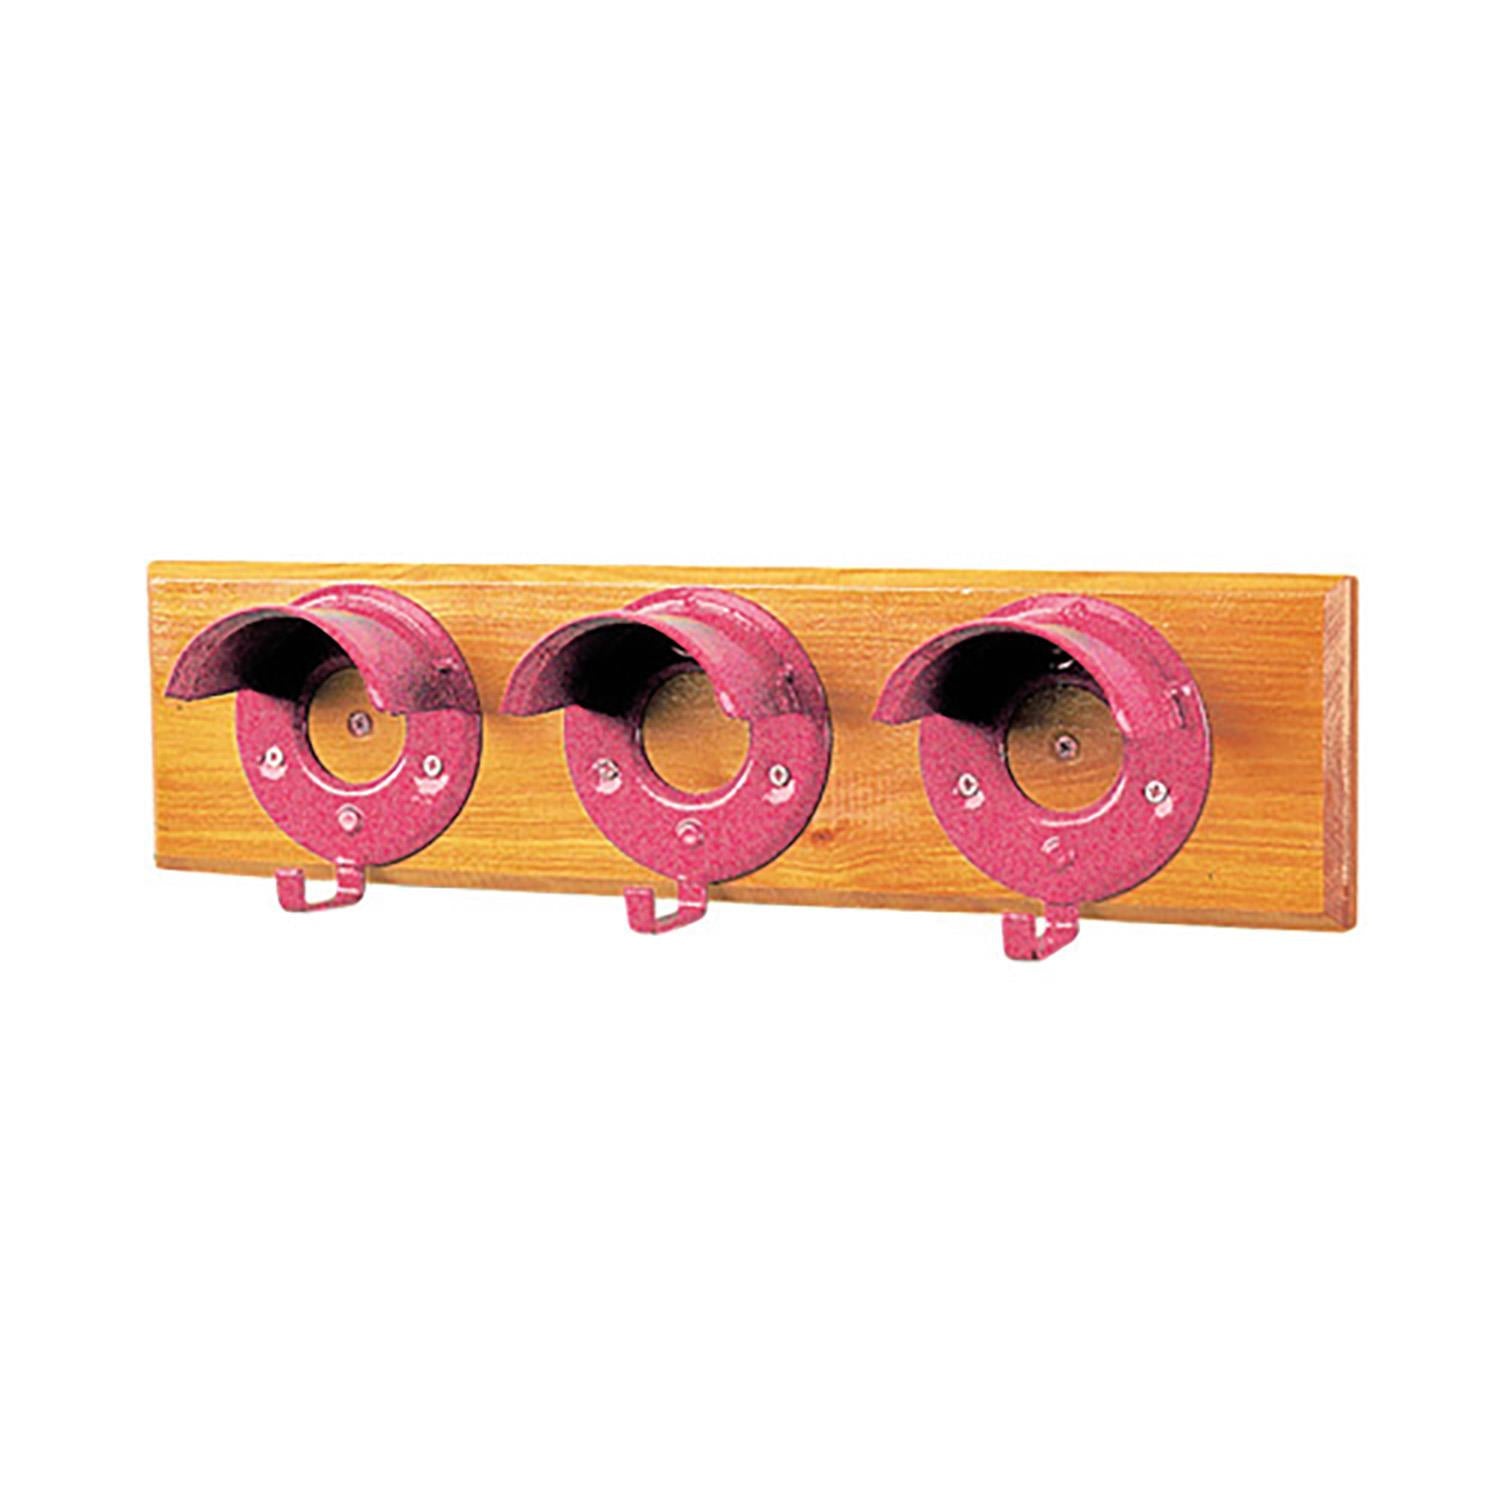 Stubbs Bridle Rack Set Of 3 On Board S203 - Just Horse Riders